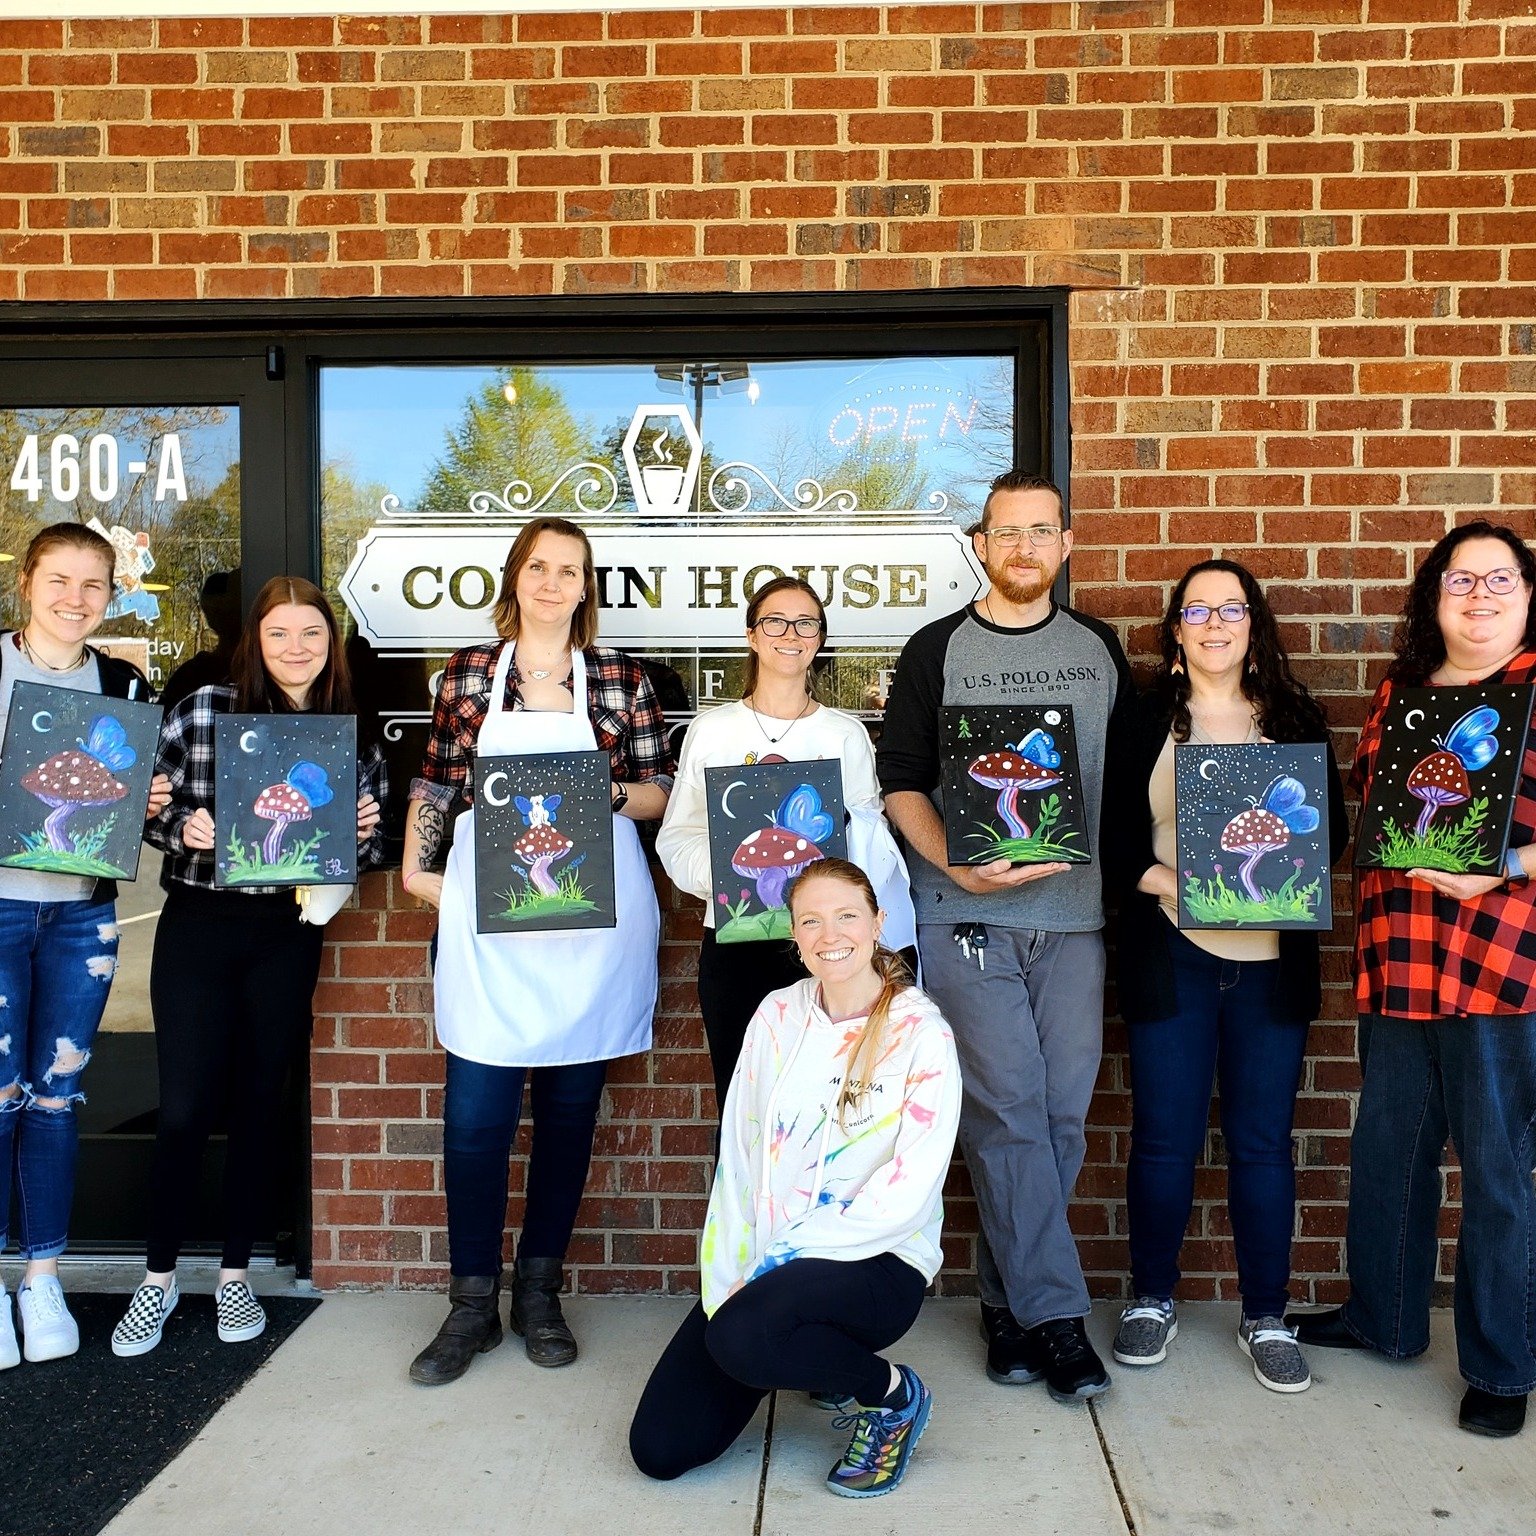 We want to personally thank those who signed up for our Canvas &amp; Coffee Brush Hour event last Saturday! Everyone had a blast getting to know one another and creating some beautiful artwork. Big thank you to our artist, Montana for the taking time